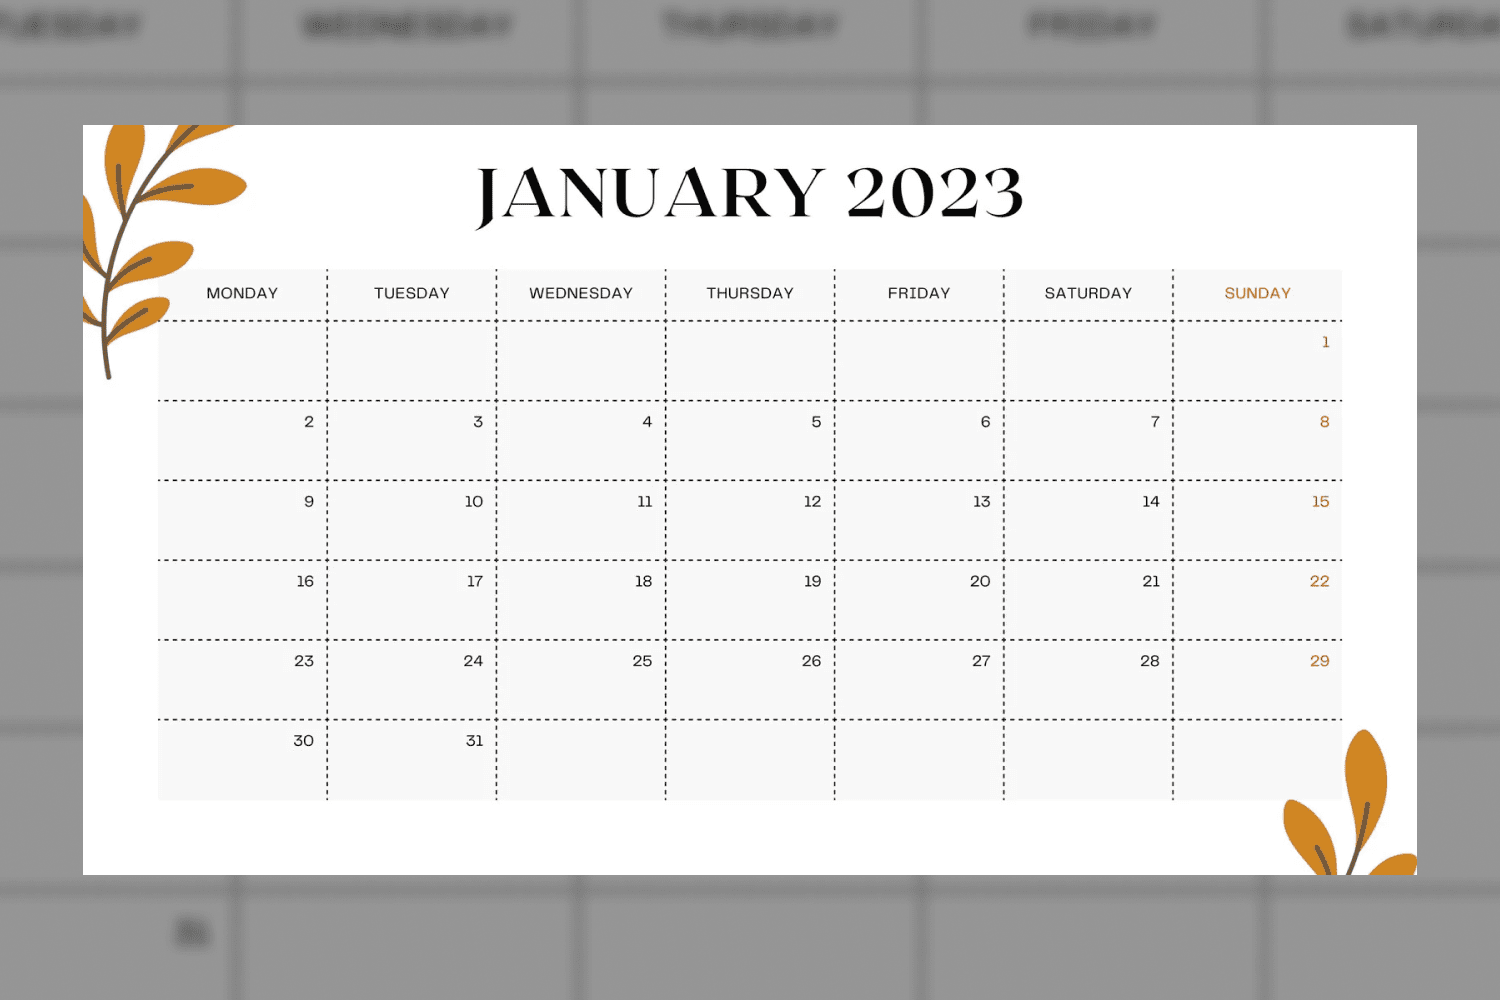 Calendar for January with a white background and yellow painted leaves around the edges.